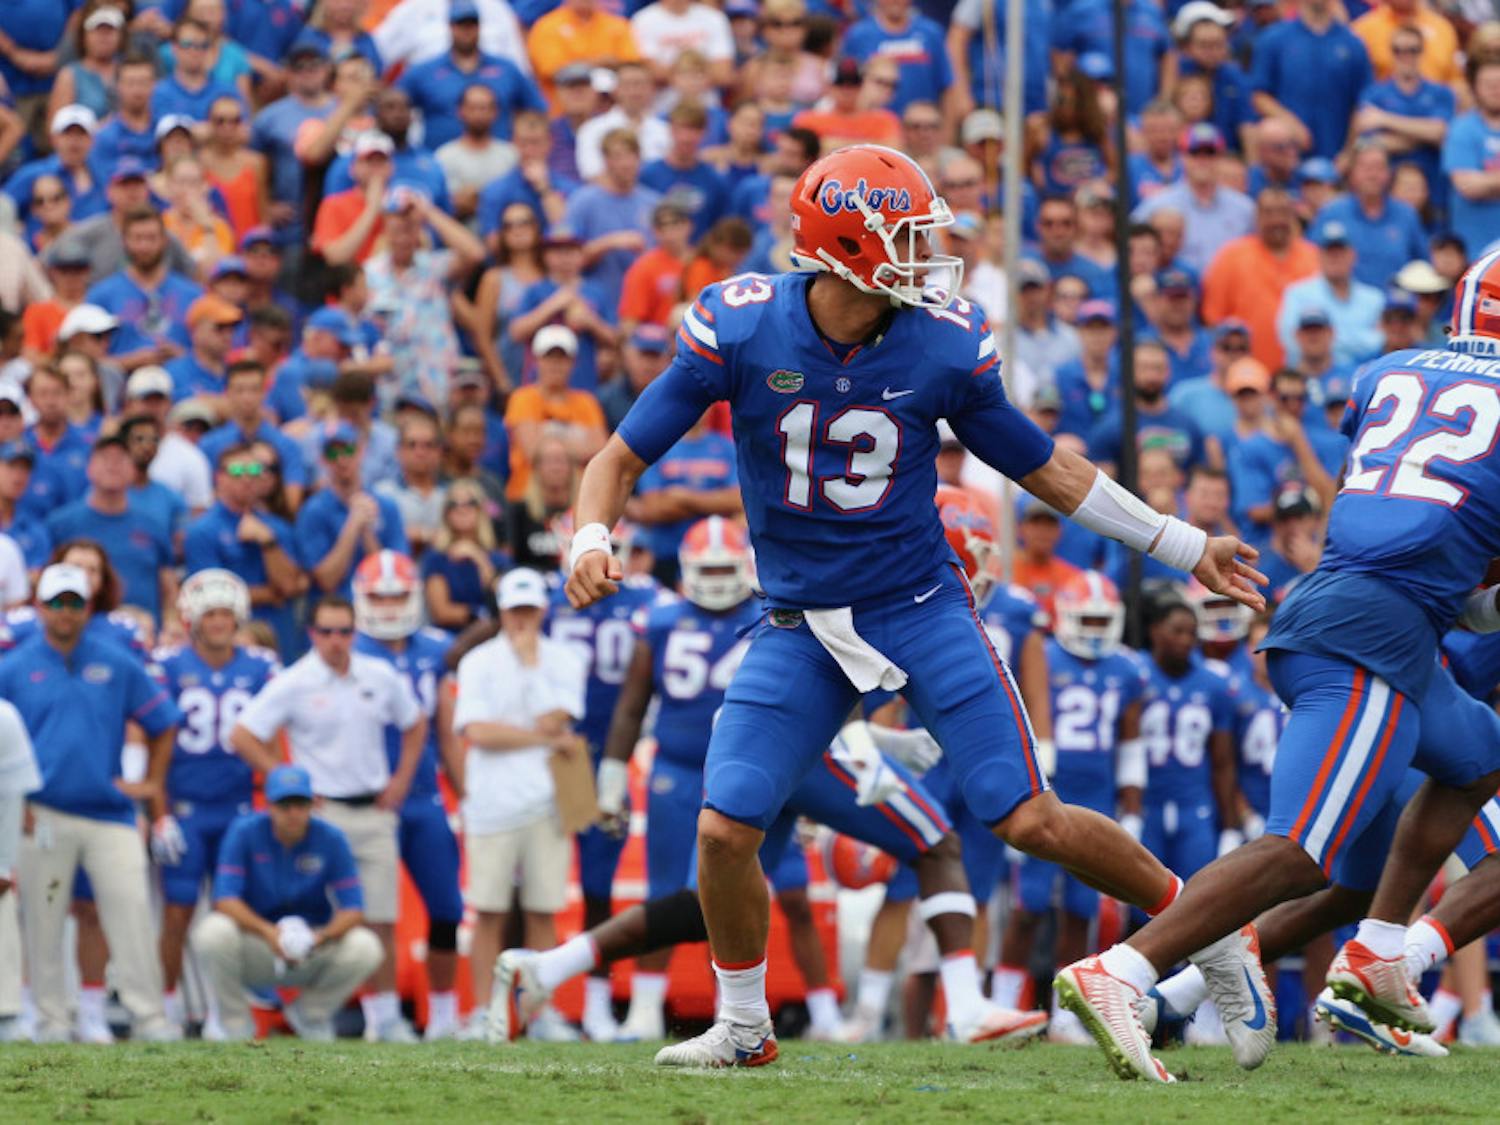 Quarterback Feleipe Franks was recruited to Florida as a four-star recruit out of high school according to 247Sports. 